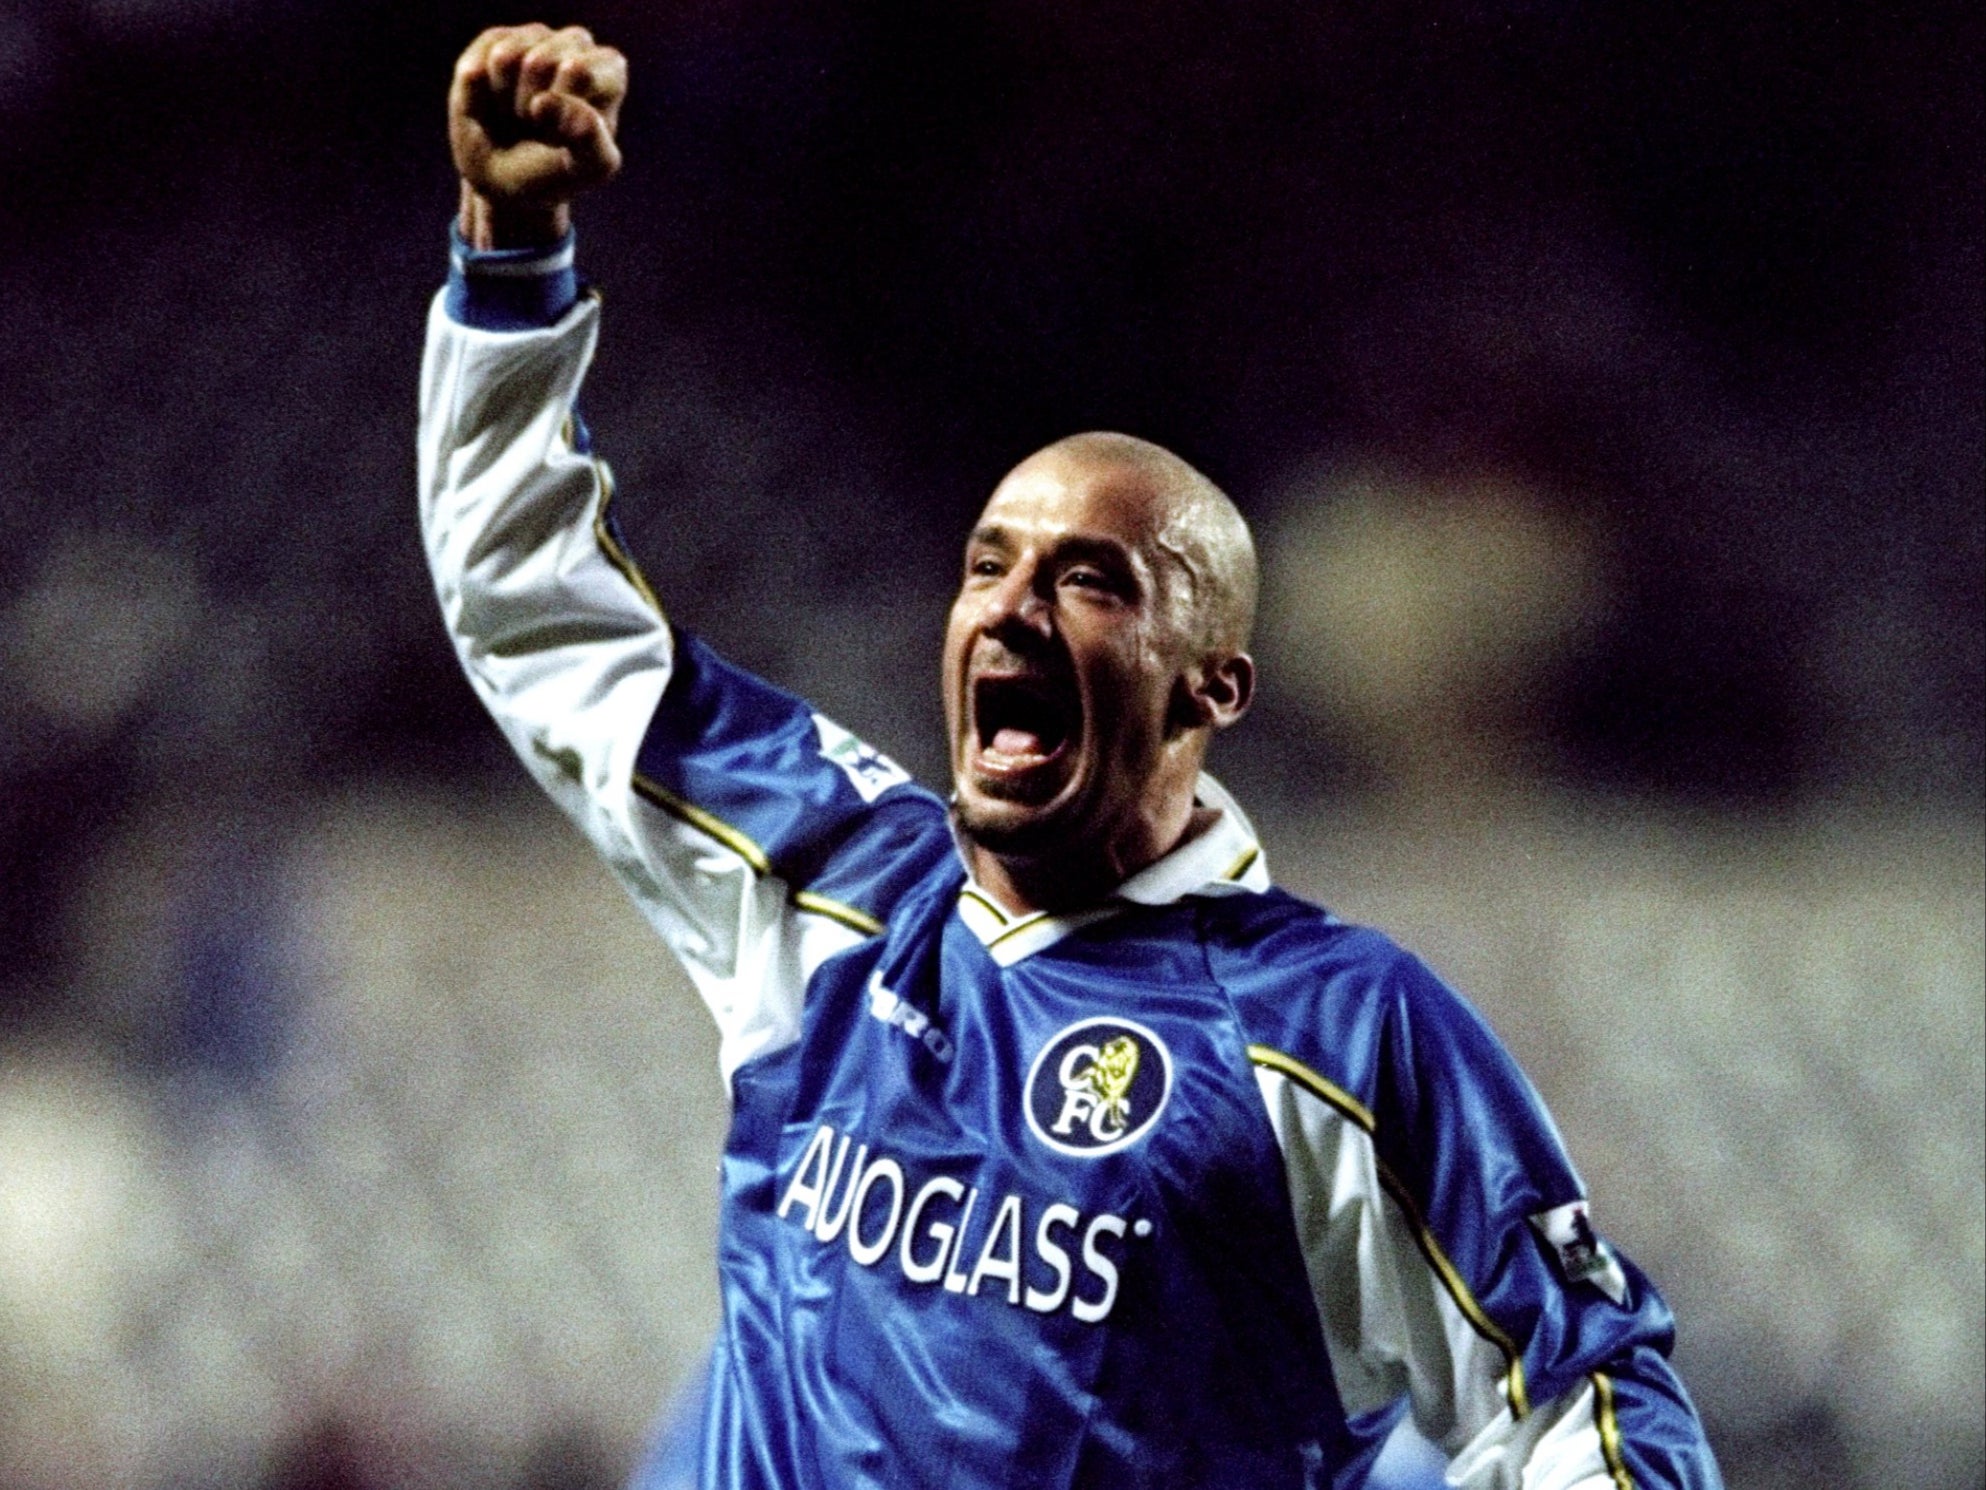 Vialli, who played for and managed the Blues, has died aged 58 following a lengthy battle with cancer